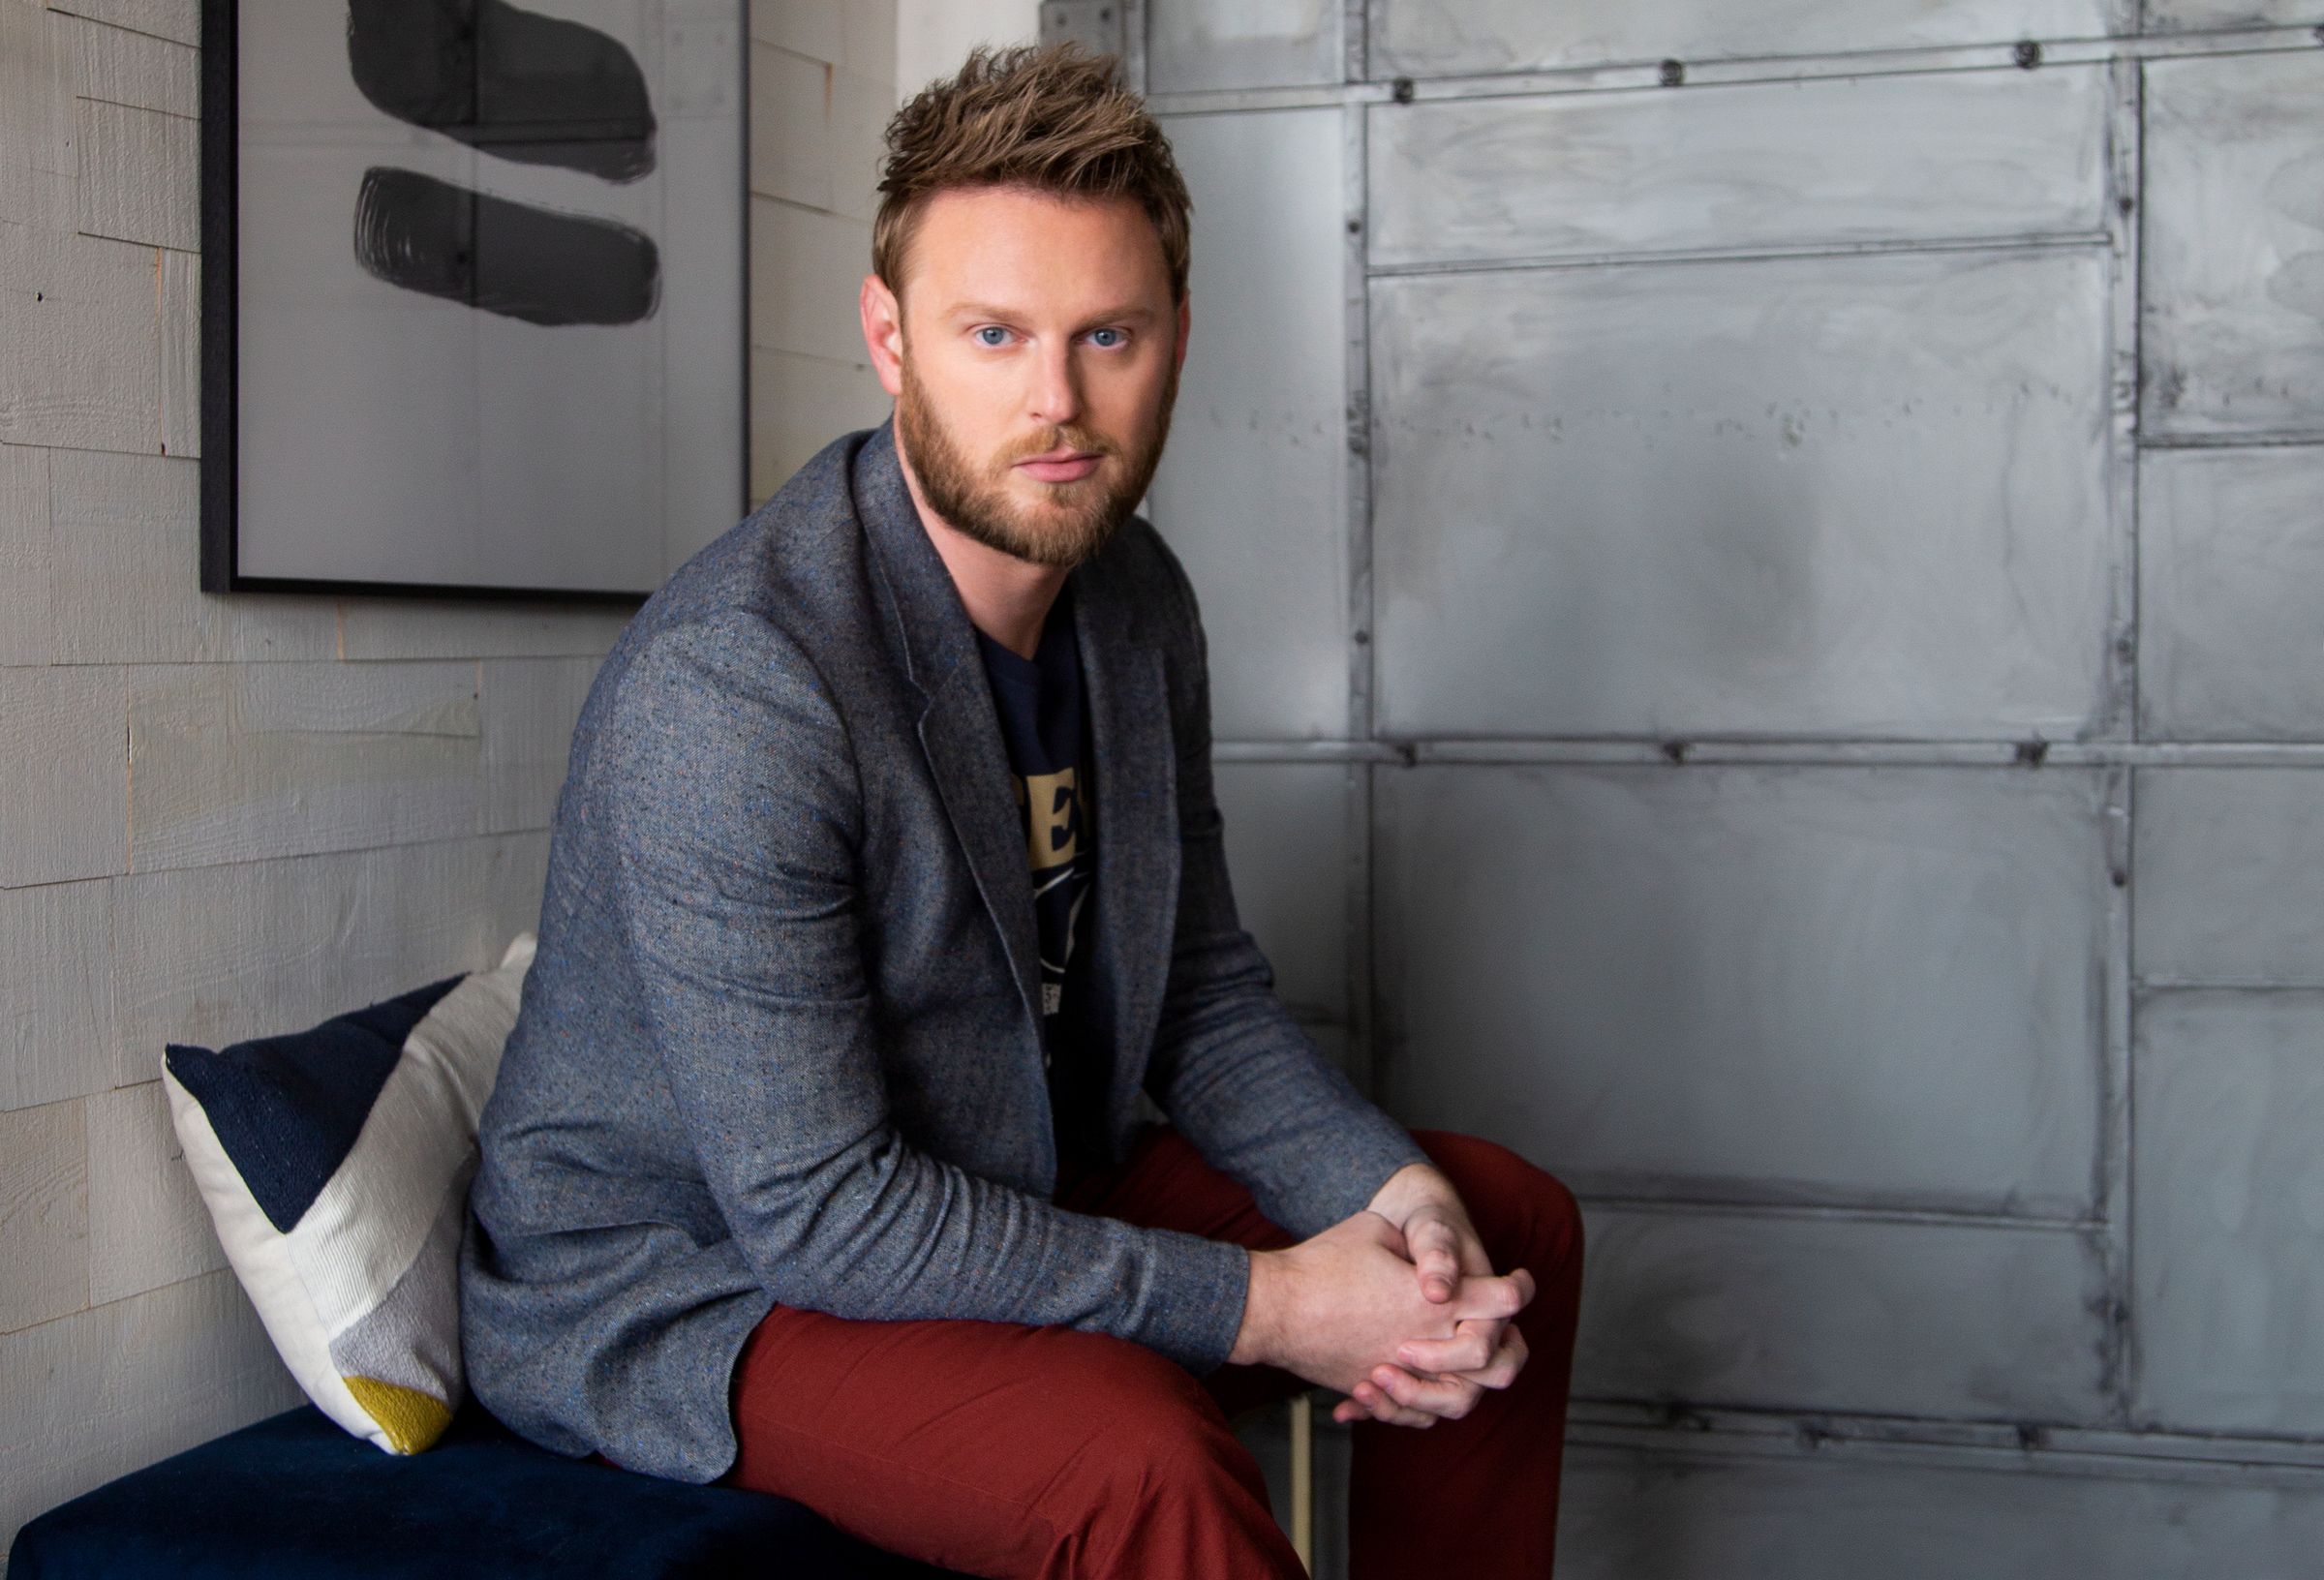 Bobby Berk Left 'Queer Eye' After 'Challenges' With Cast and Schedule